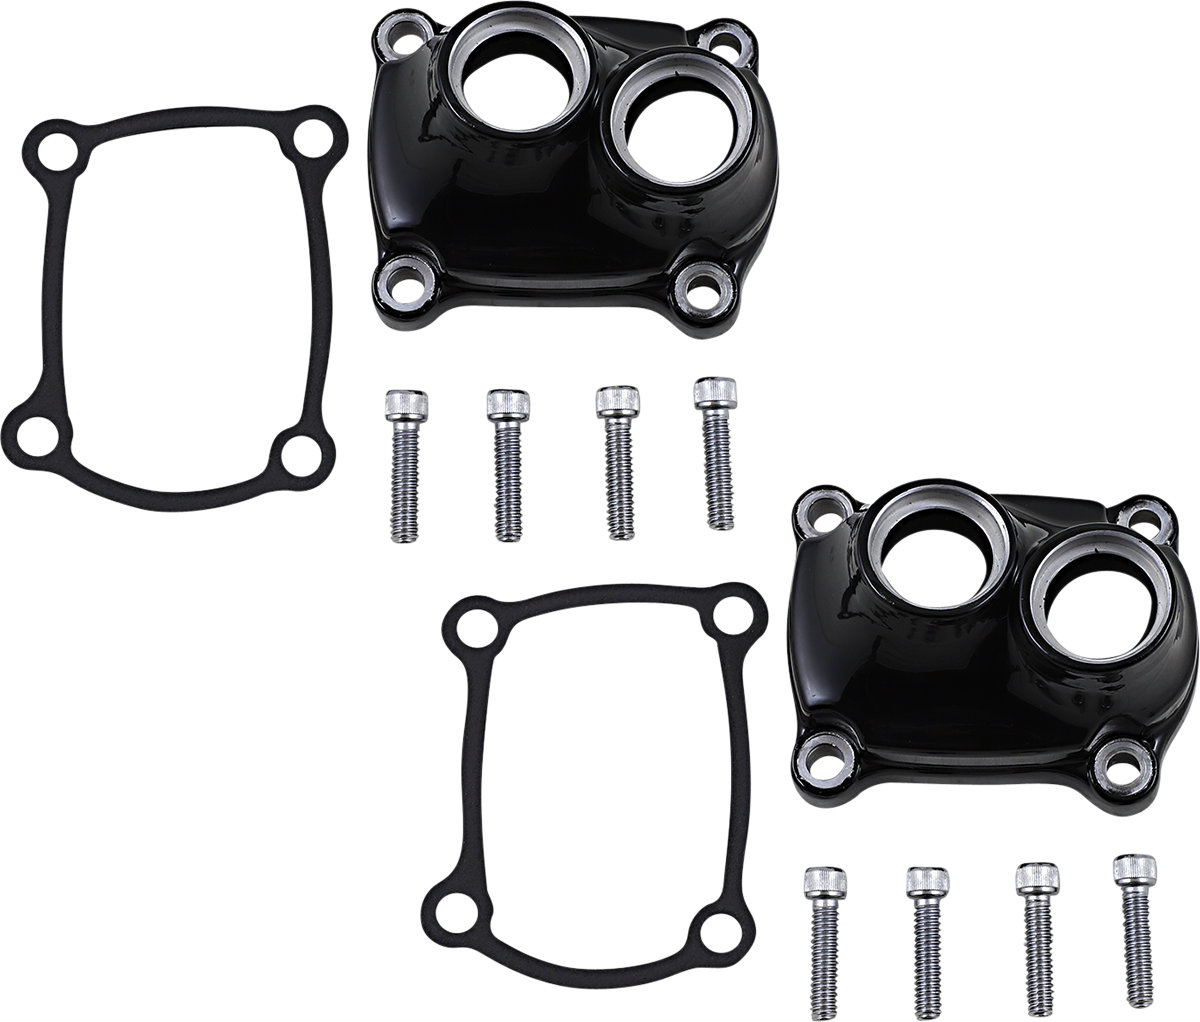 Drag Specialties Black Lifter Block Covers 17-20 Harley M8 Touring Softail FLHX